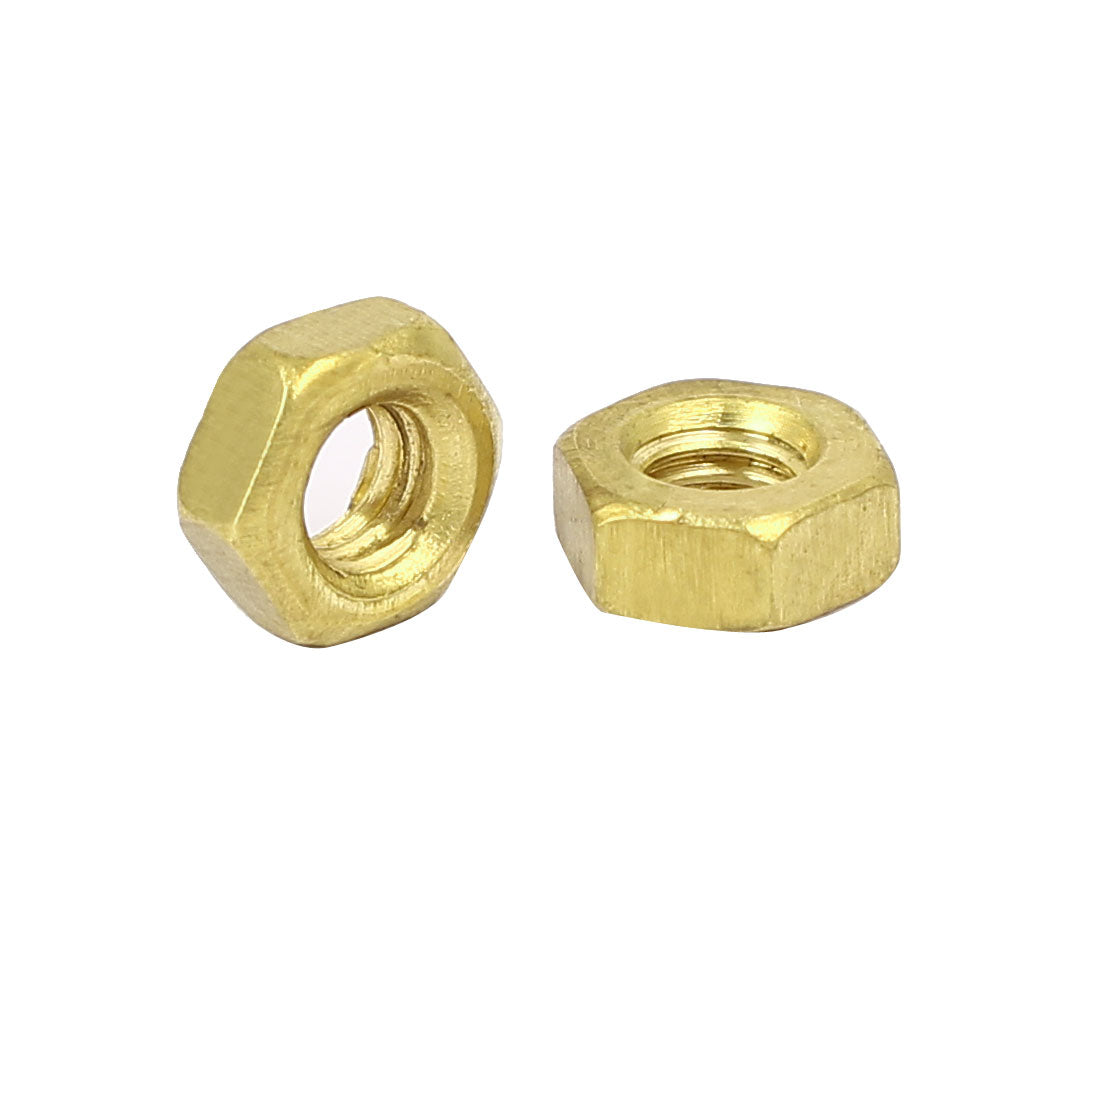 uxcell Uxcell M4 Brass Finished Metric Hex Nut Fastener Brass Tone 10pcs